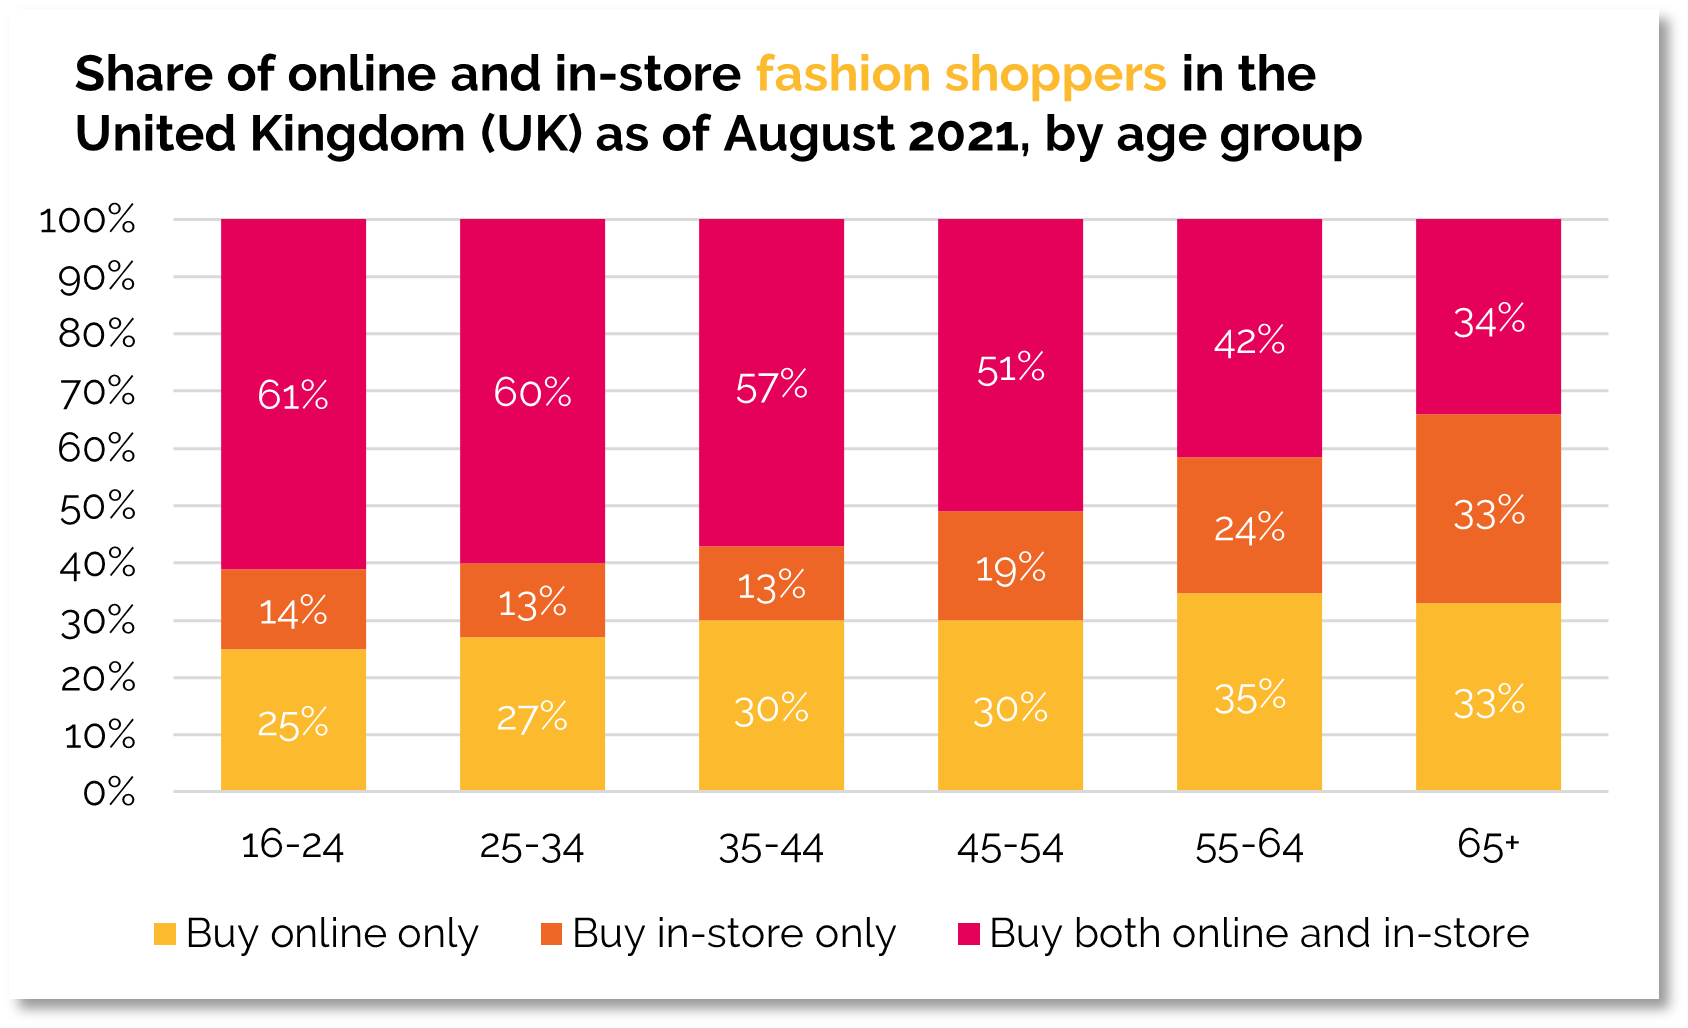 Digital first fashion 1 - online versus instore preference by age